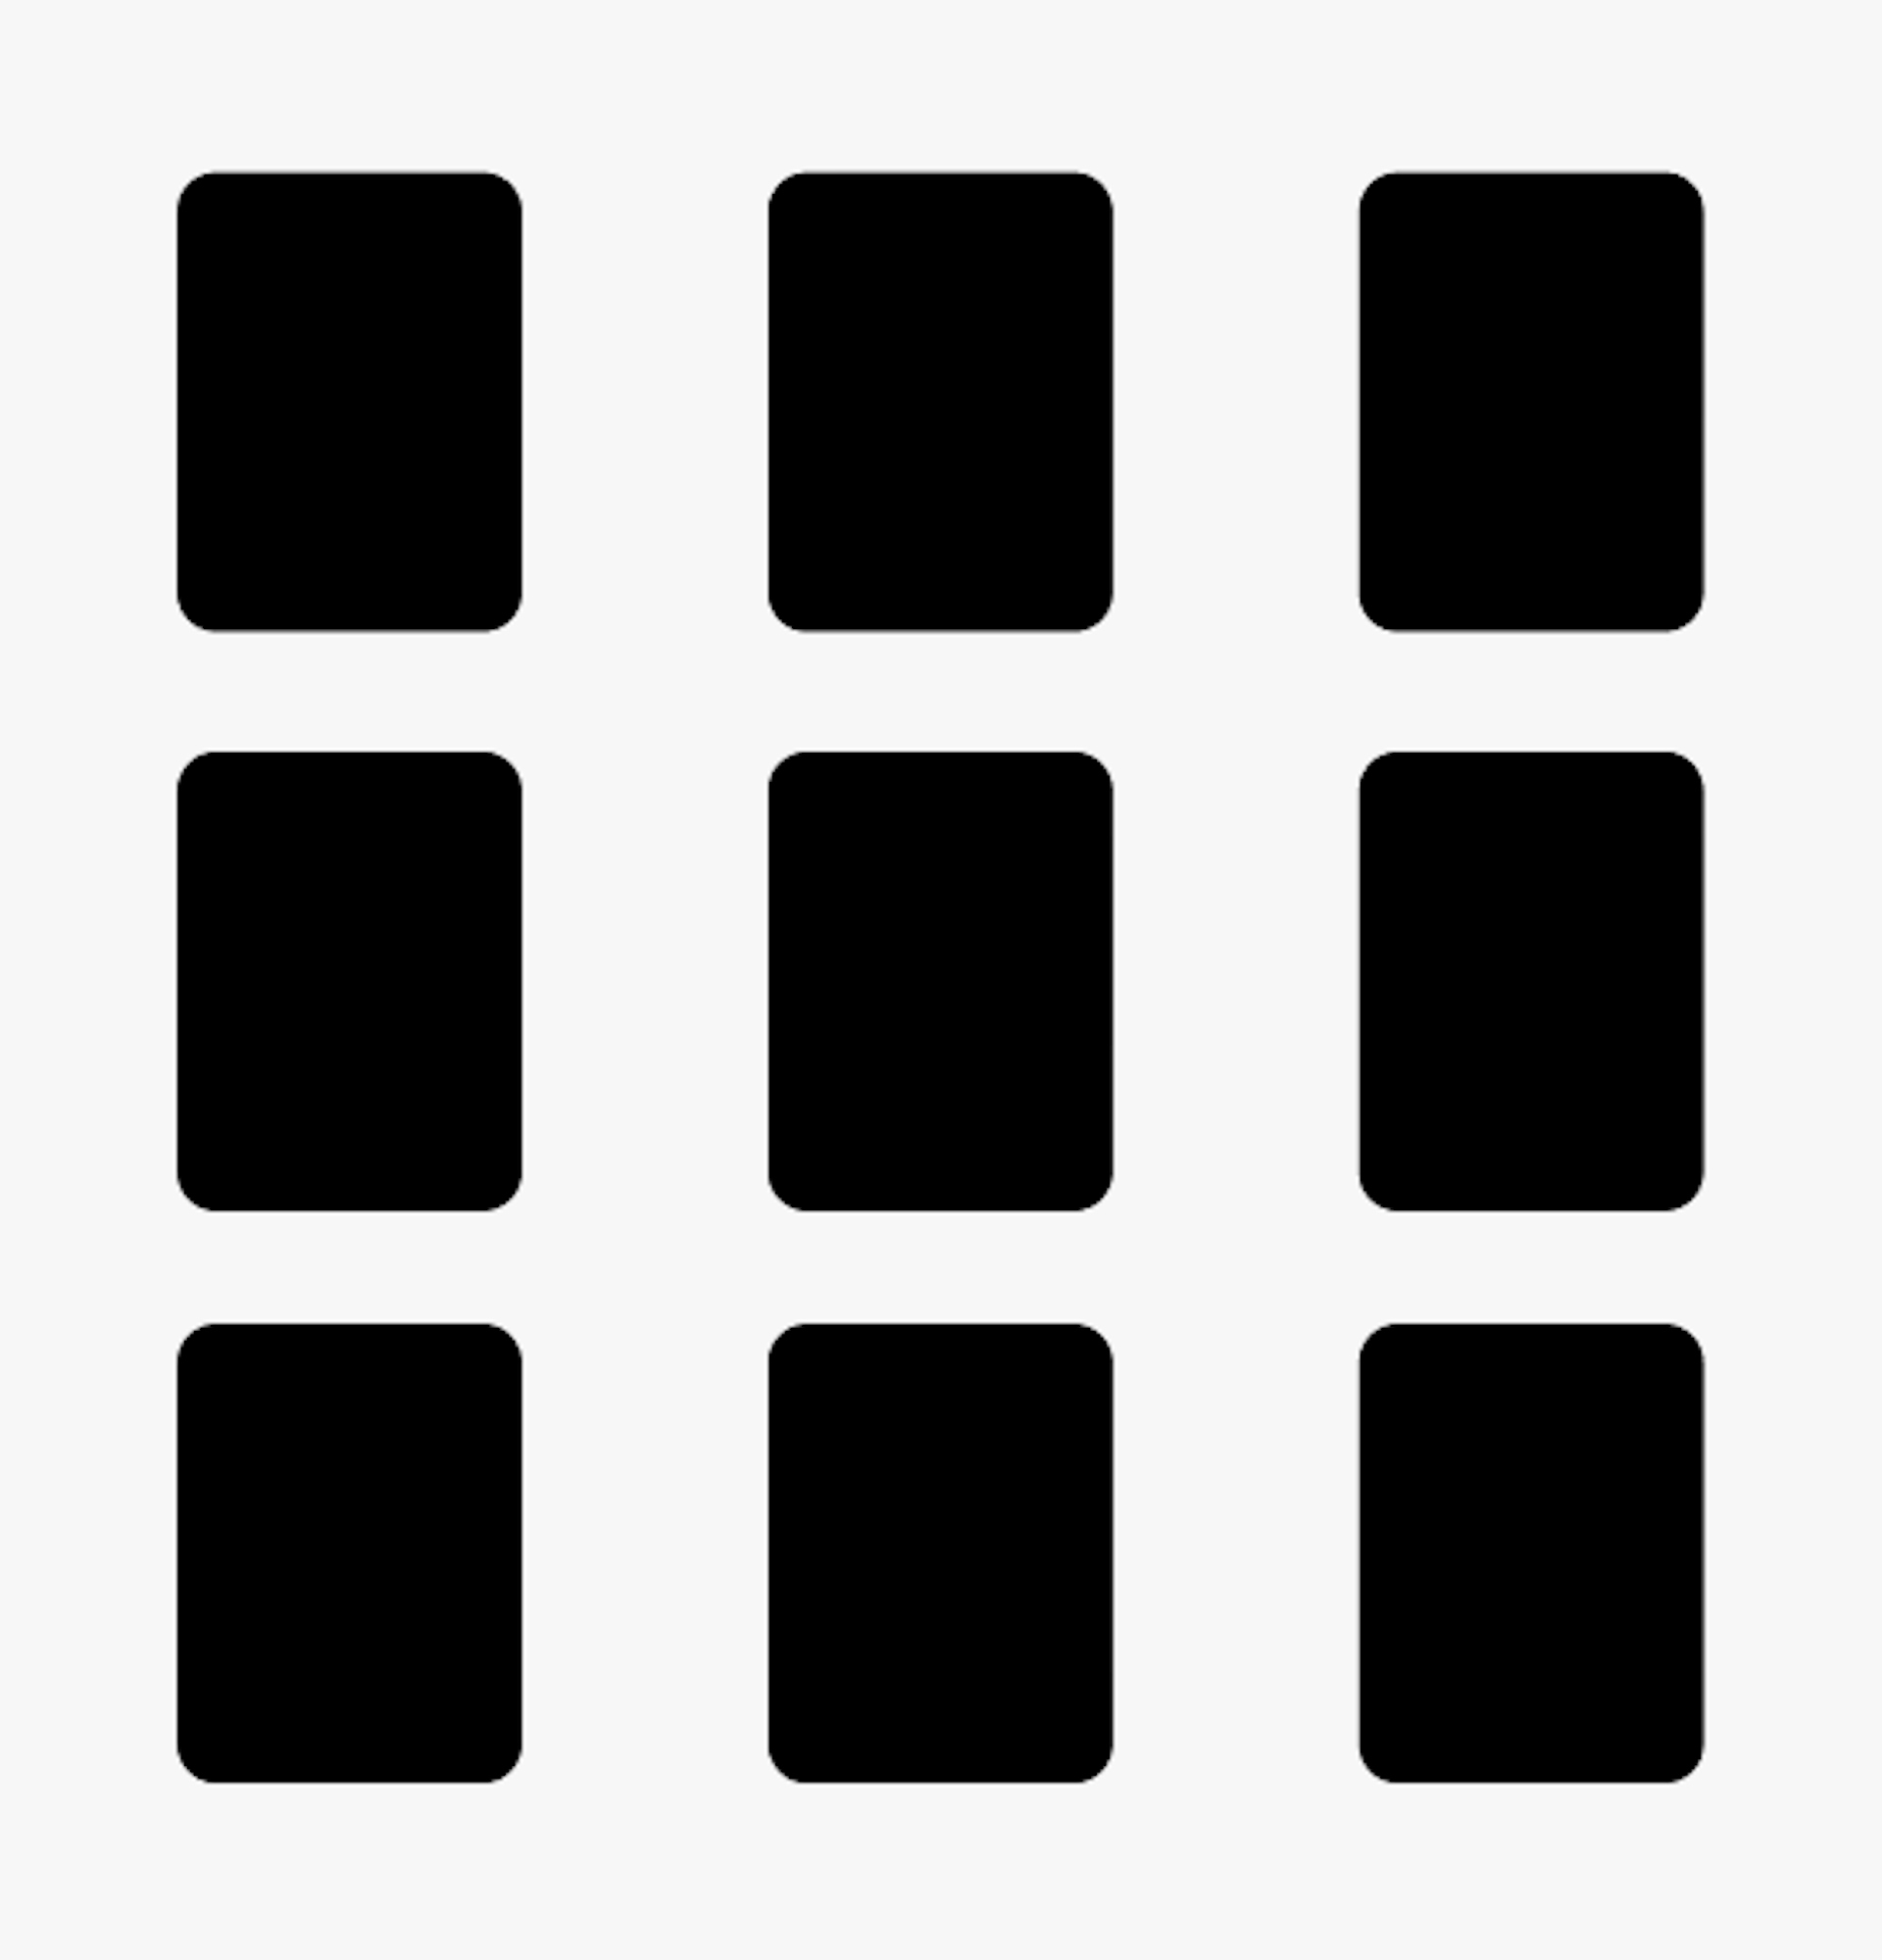 Graphic, black rectangular shapes in portrait orientation in a neat grid of 3 columns and 3 rows.